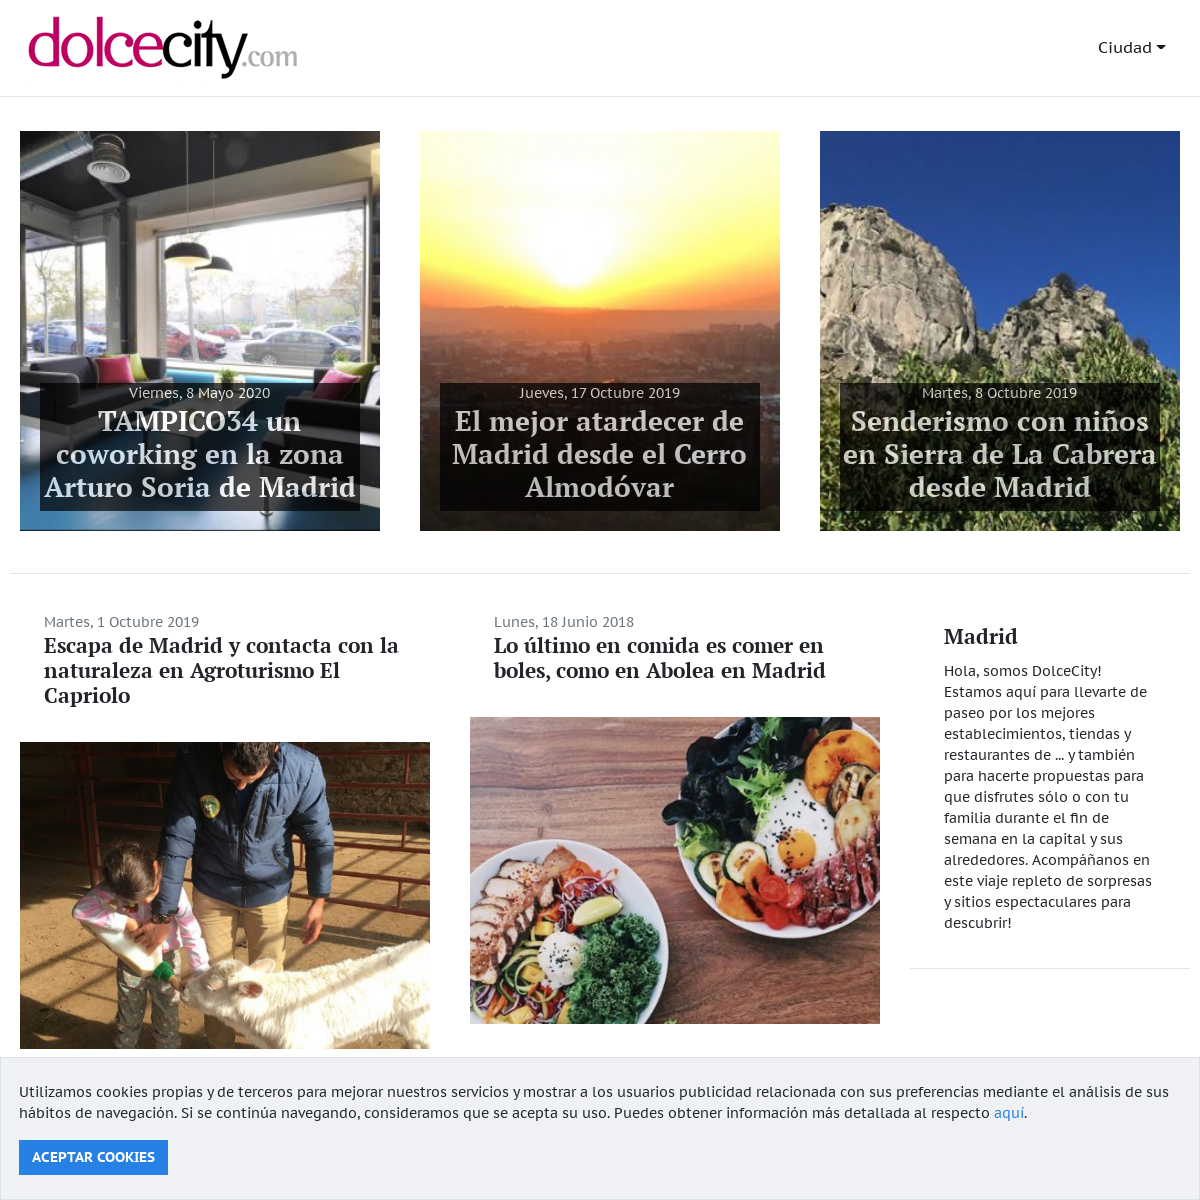 A complete backup of dolcecity.com